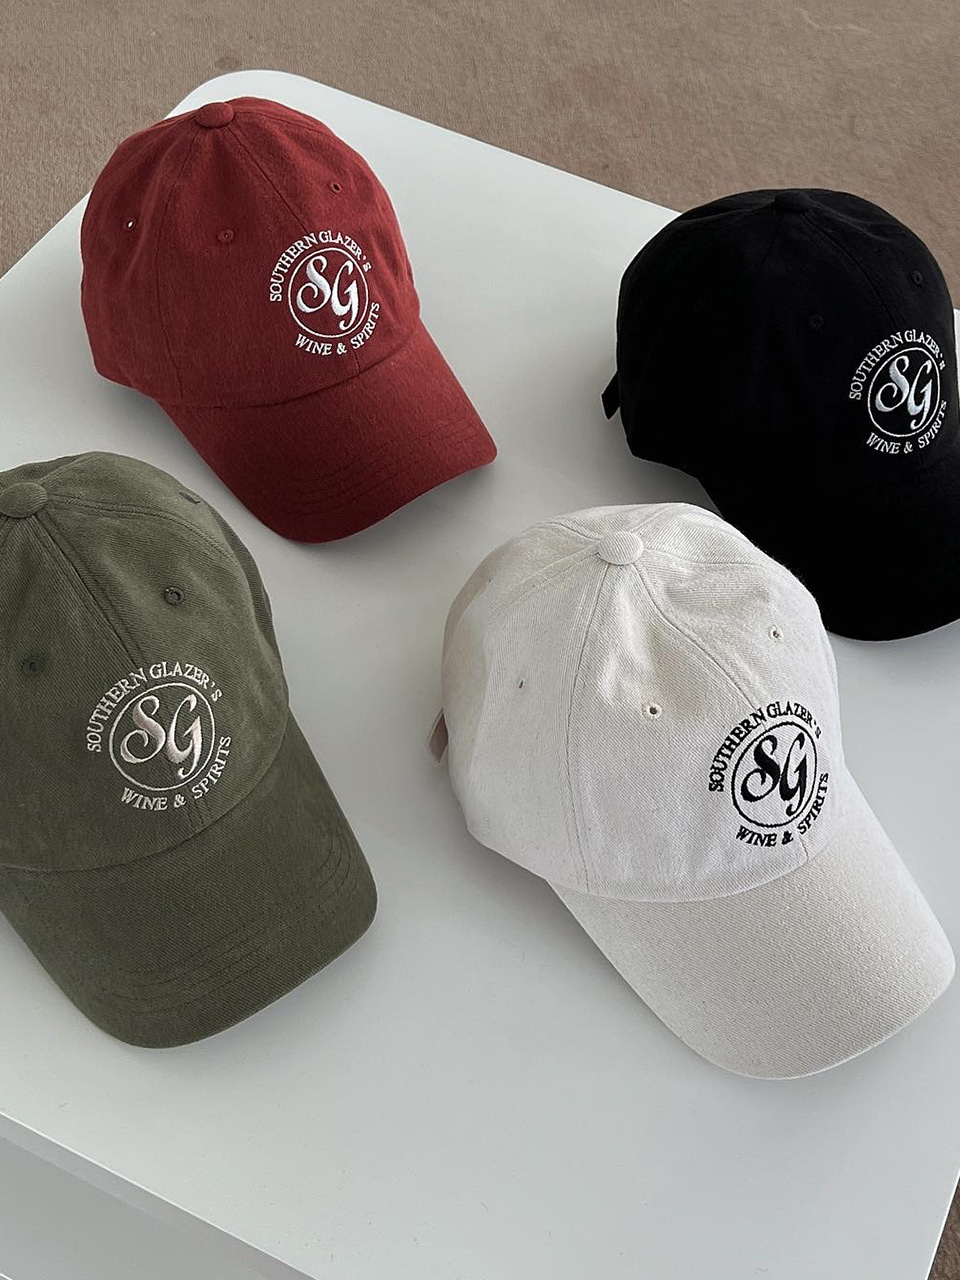 southern glazers cap (5color)